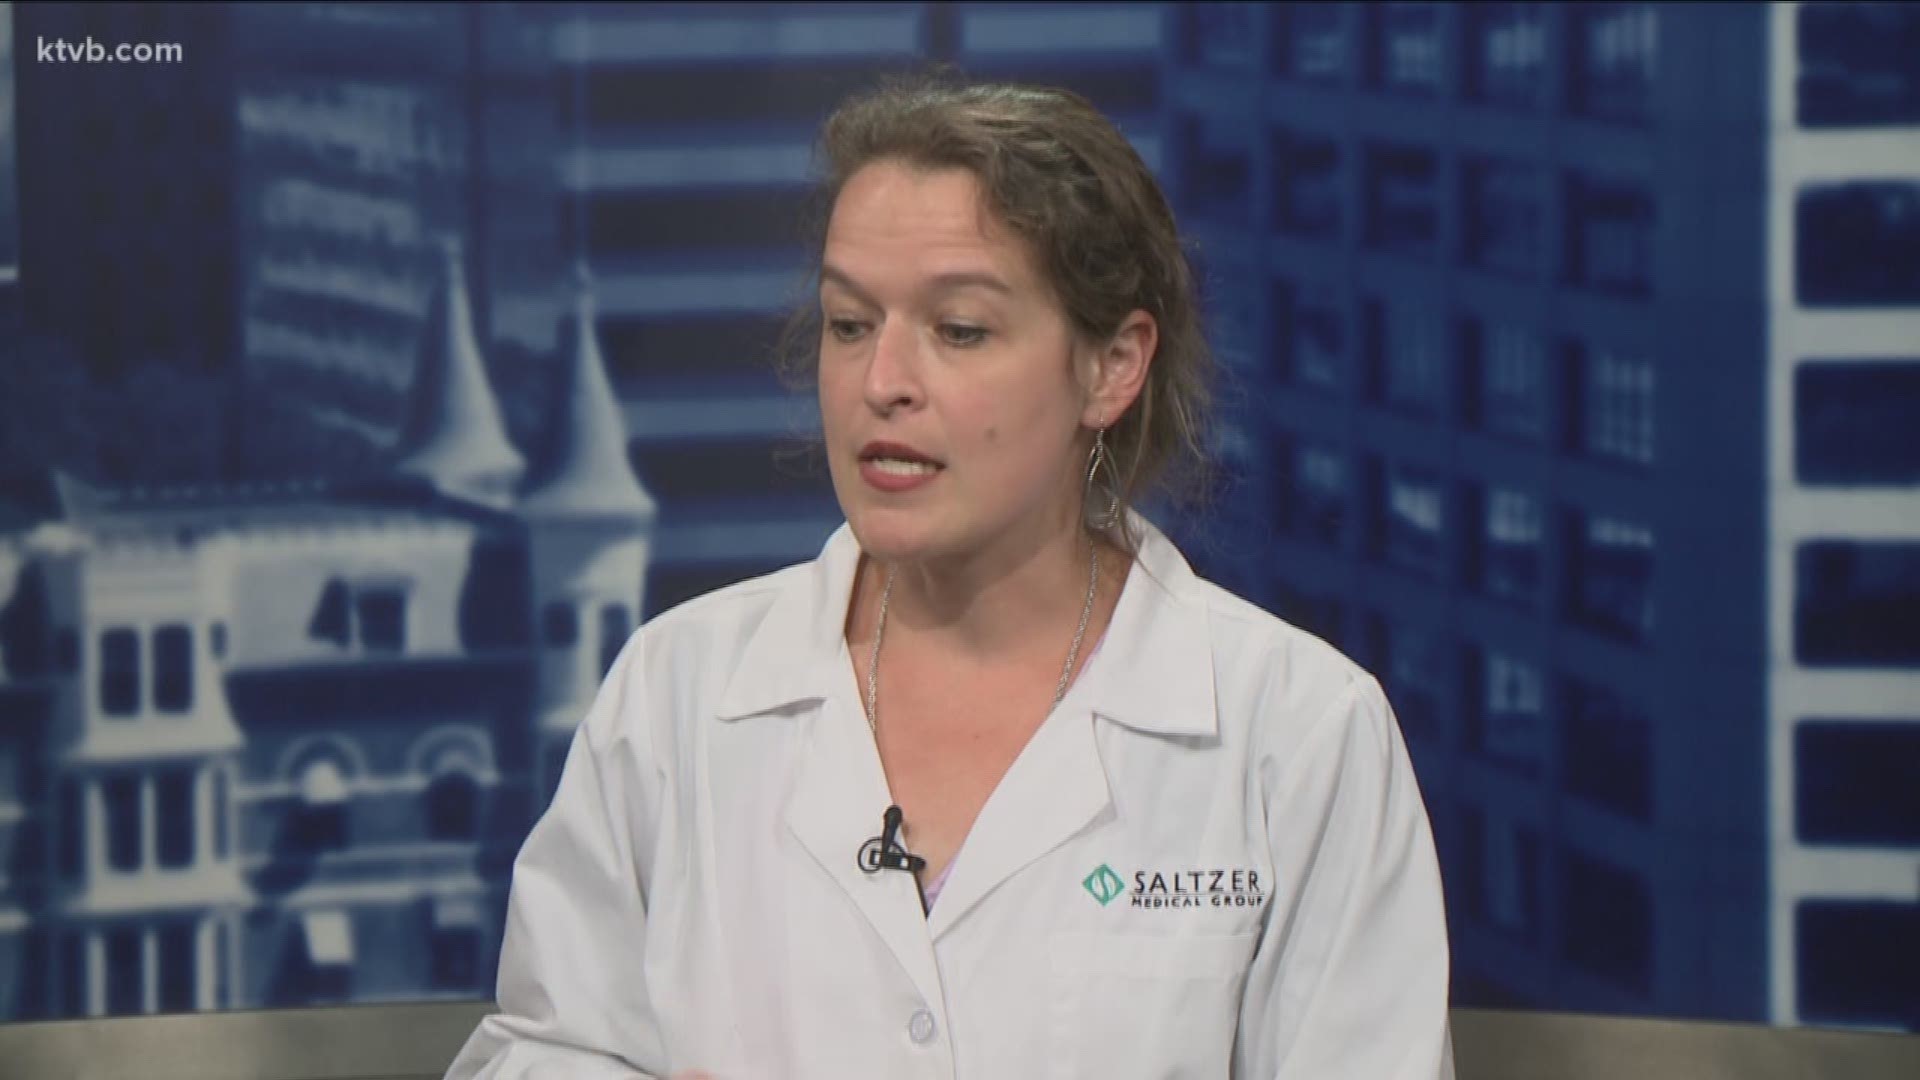 Dr. Megan Kasper with the Saltzer Medical Group discusses important health issues facing women.